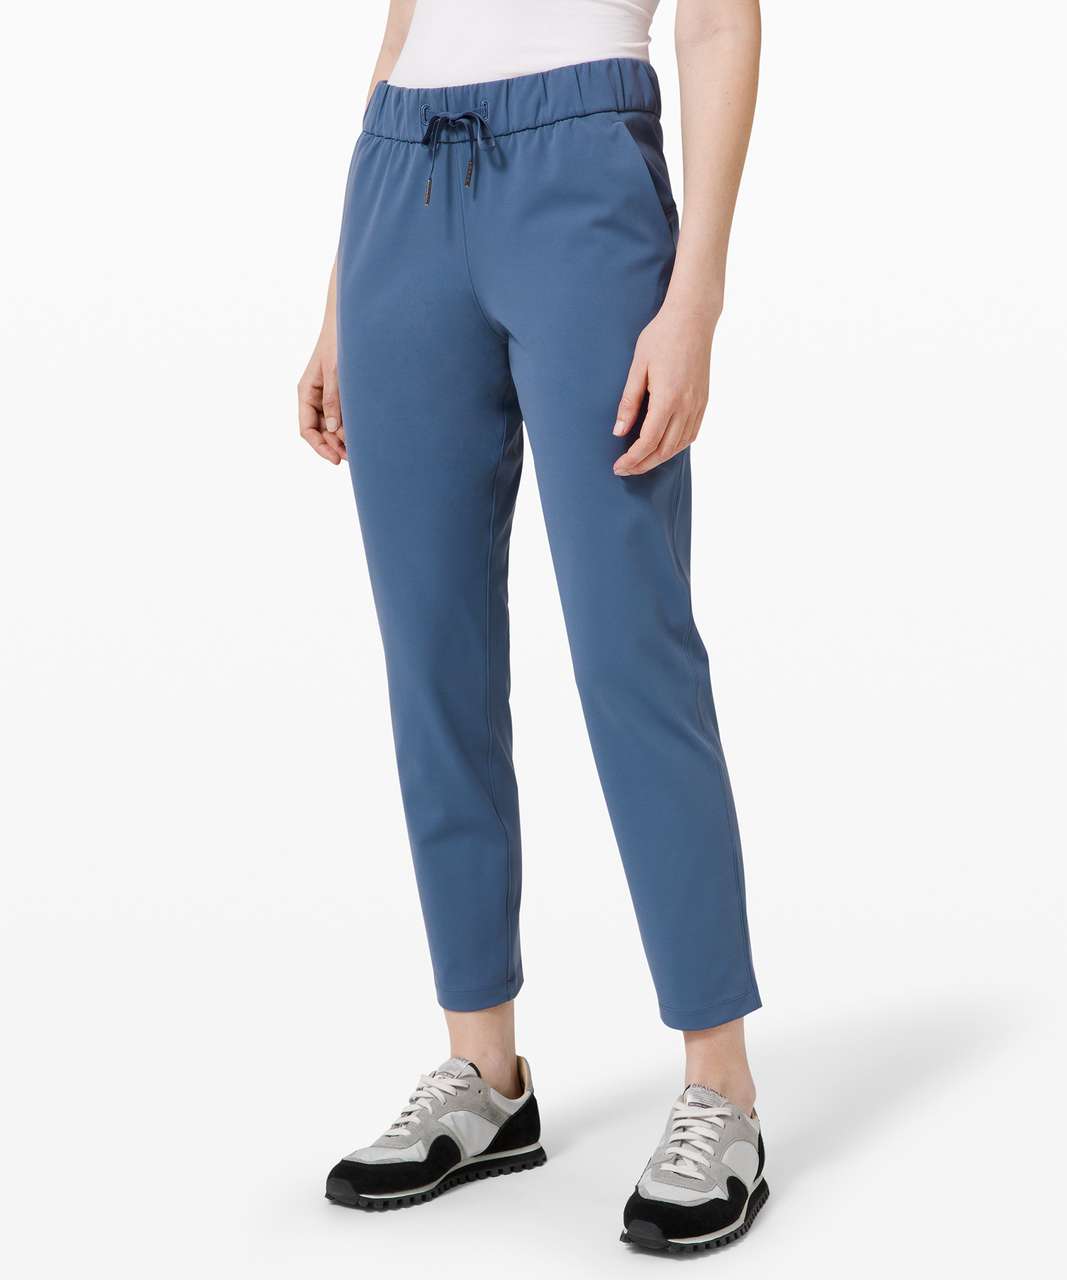 Lululemon On the Fly Pant Tall - Ink Blue